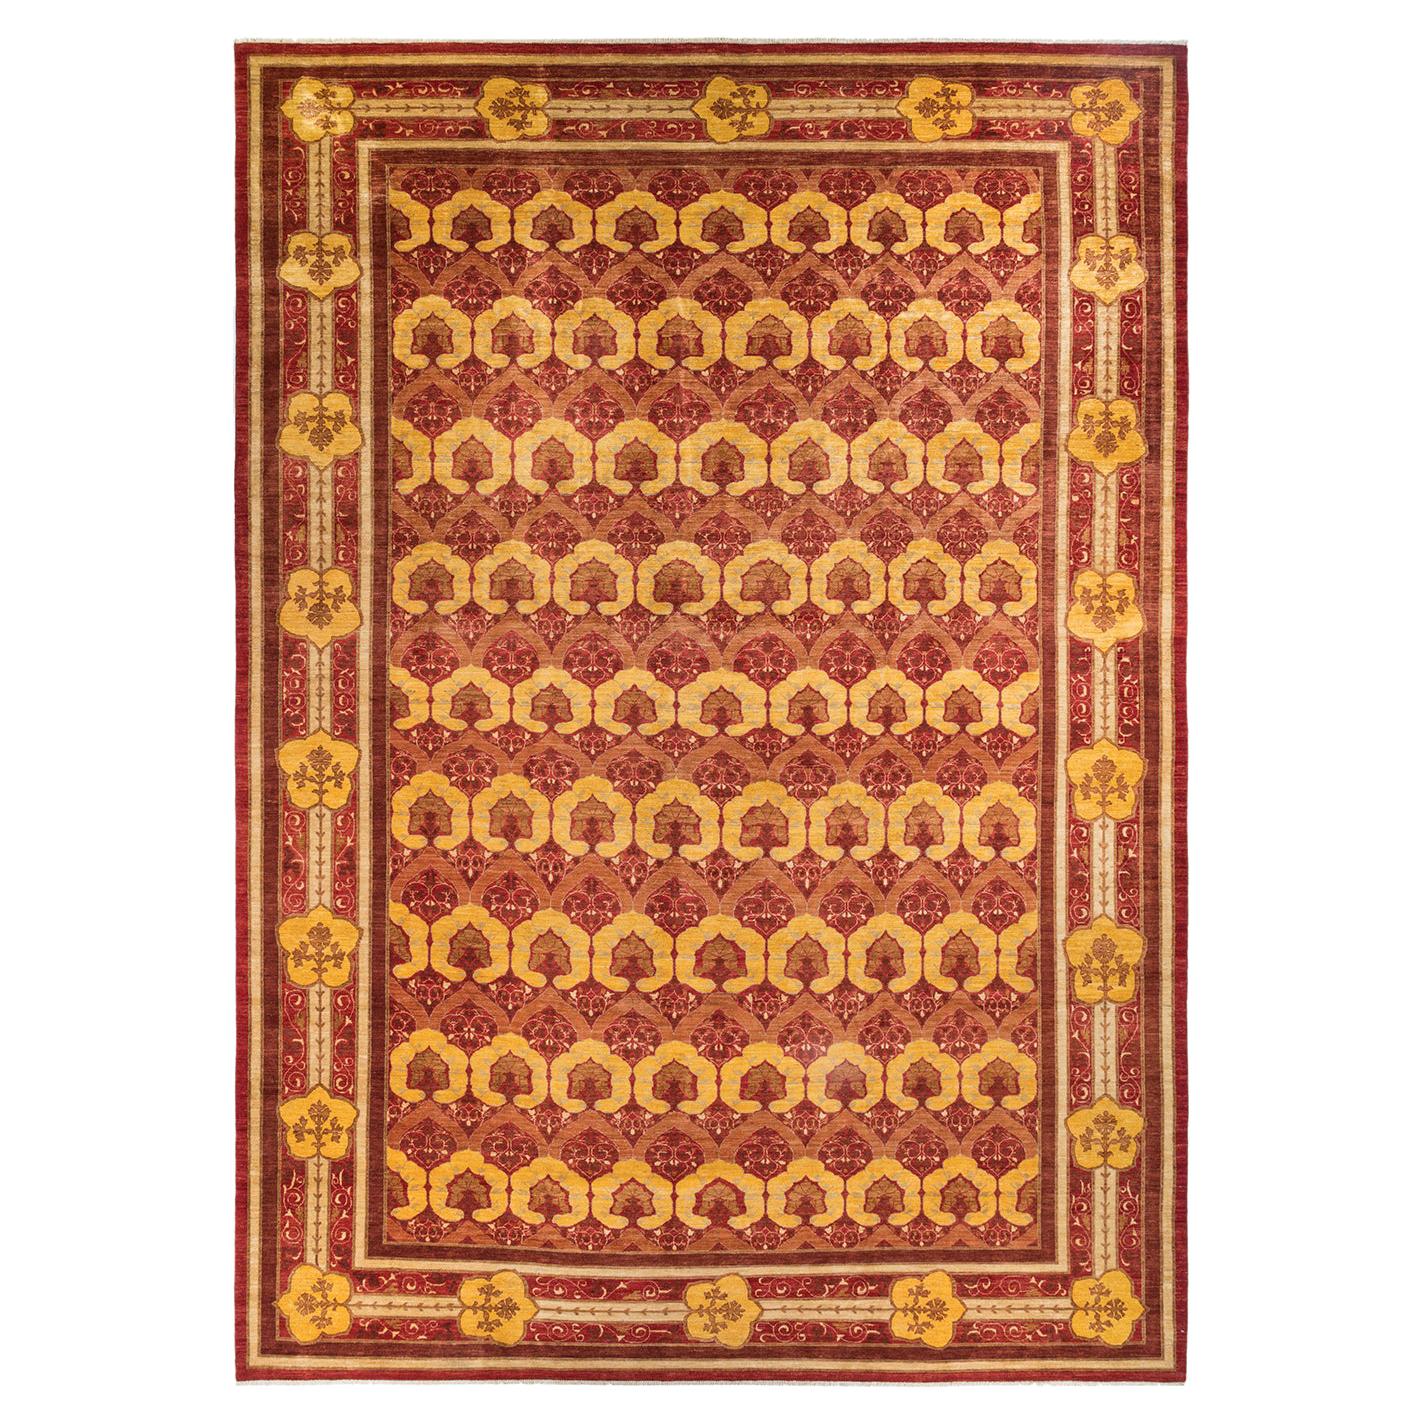 Arts & Crafts, One-of-a-Kind Hand-Knotted Area Rug, Red